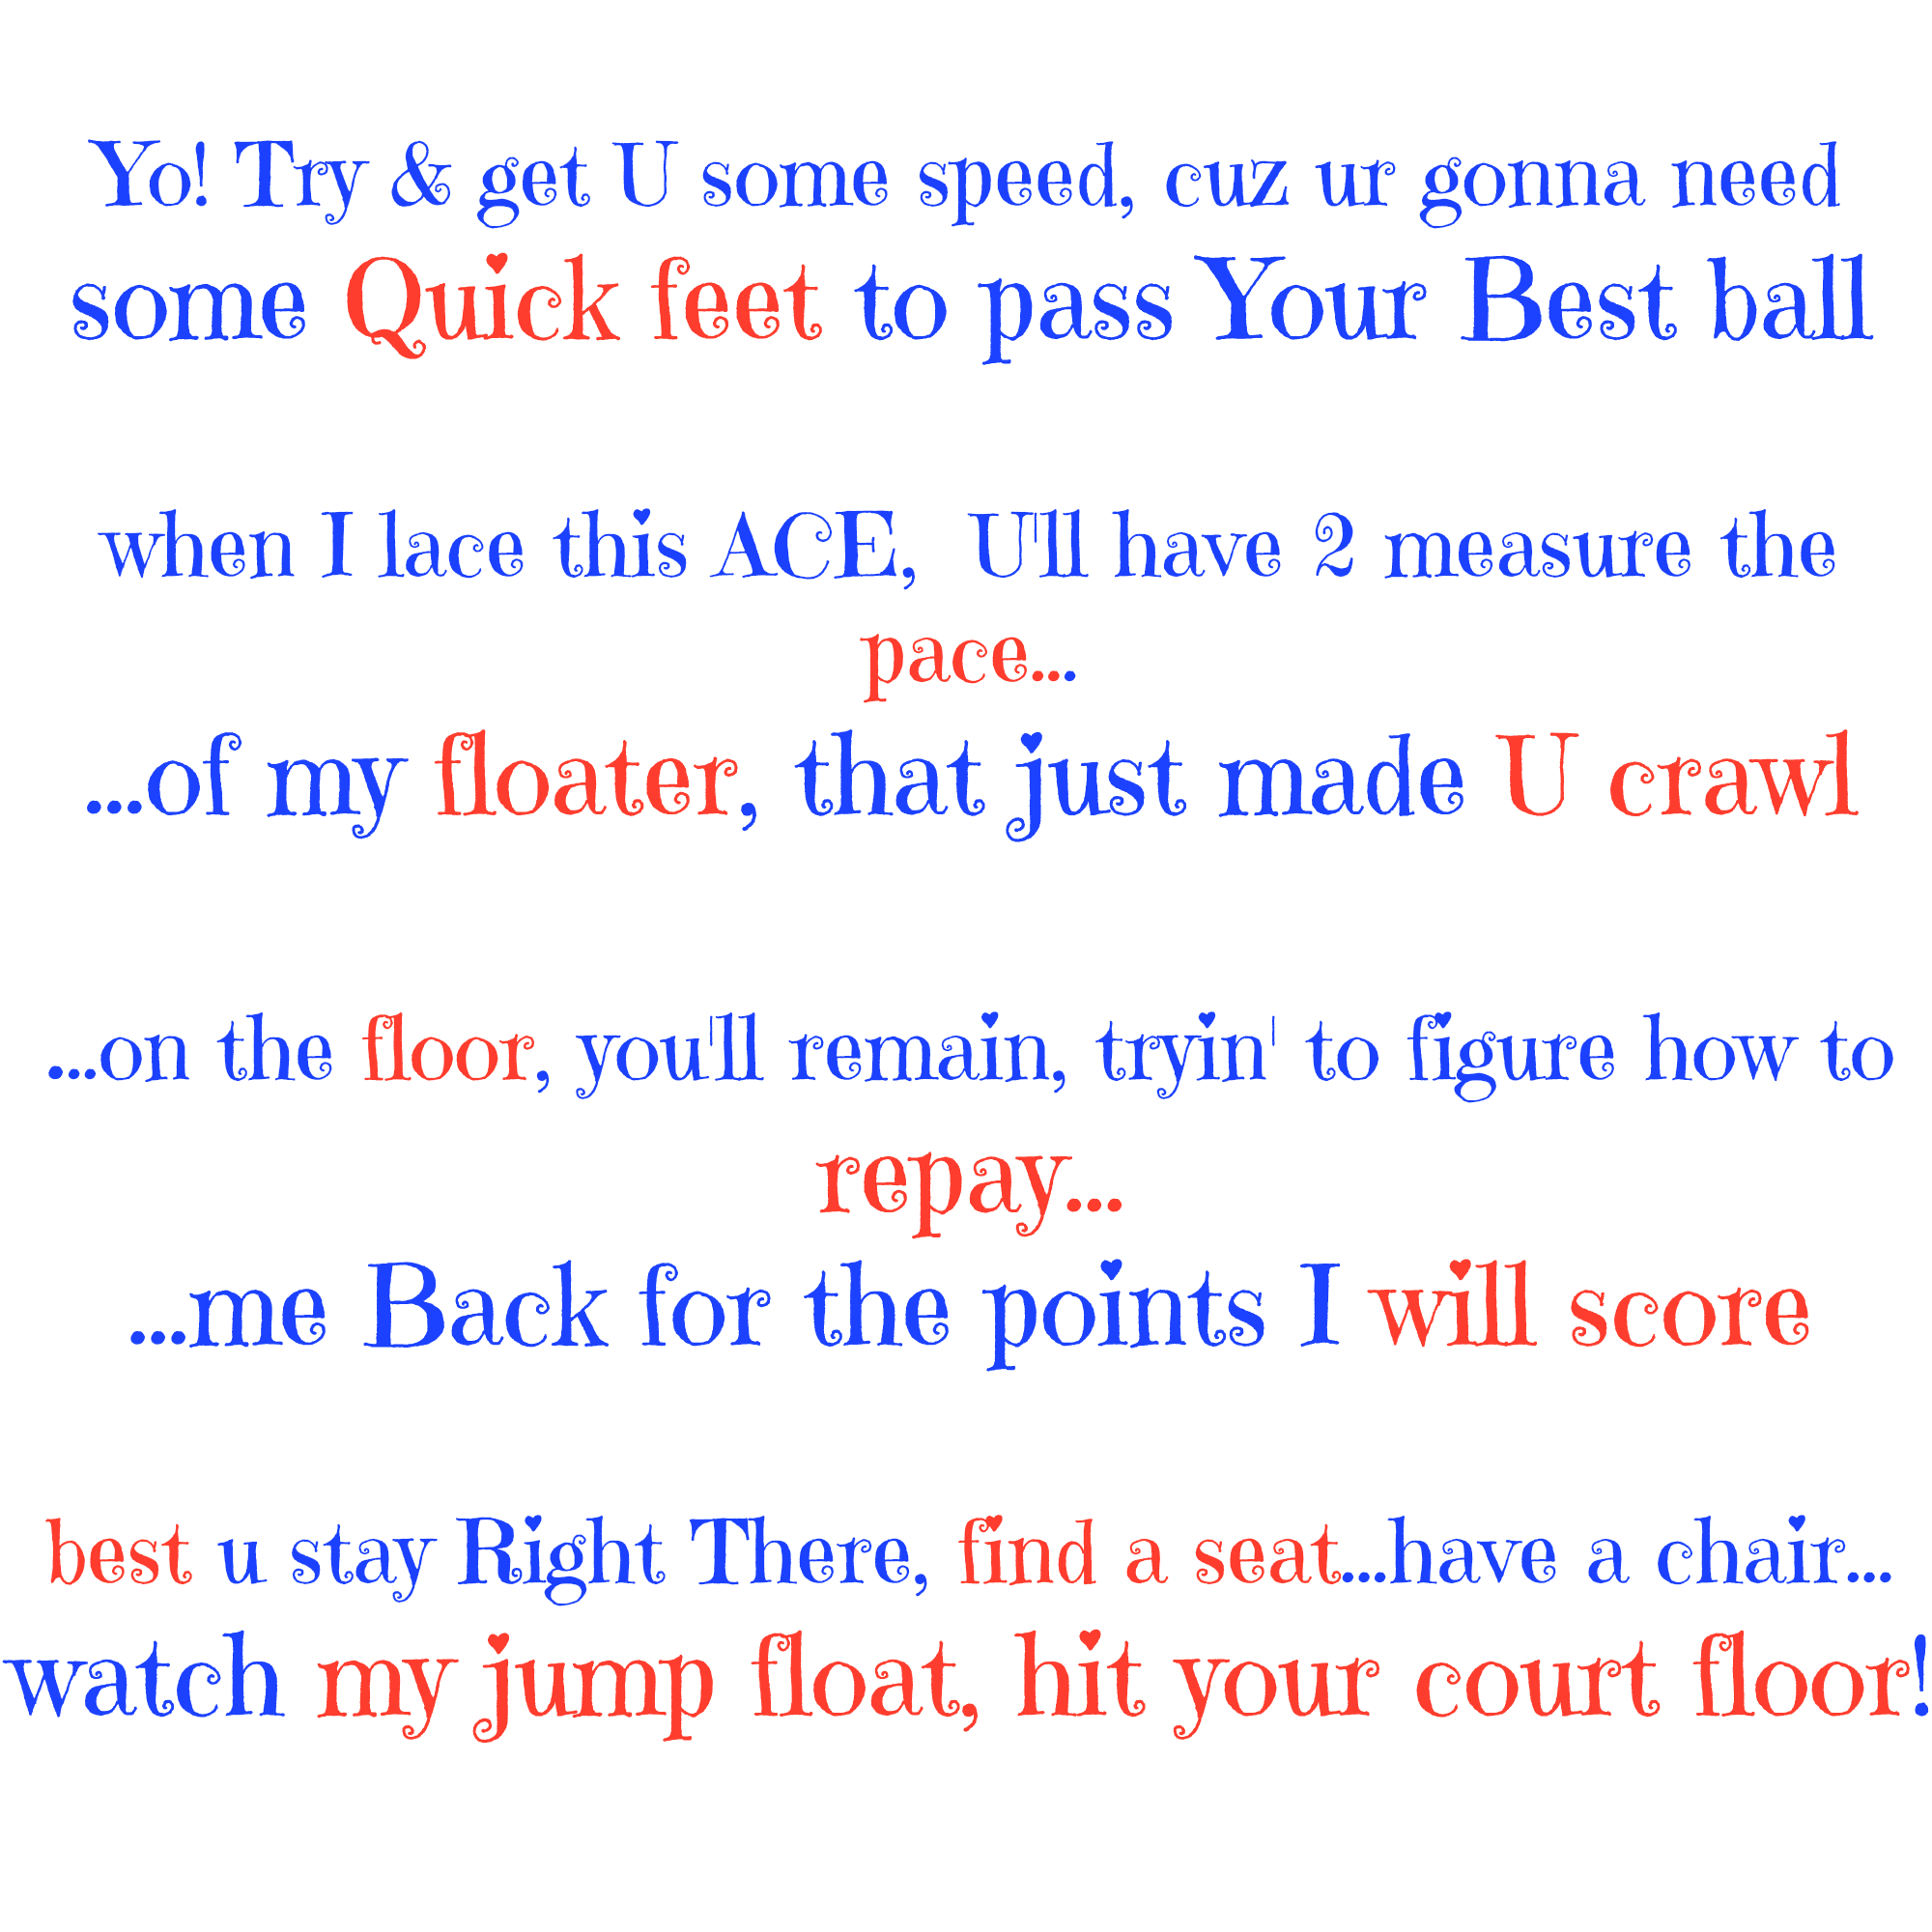 Yo! try and get you some speed and more self confidence quotes for volleyball servers on DearVolleyball.com